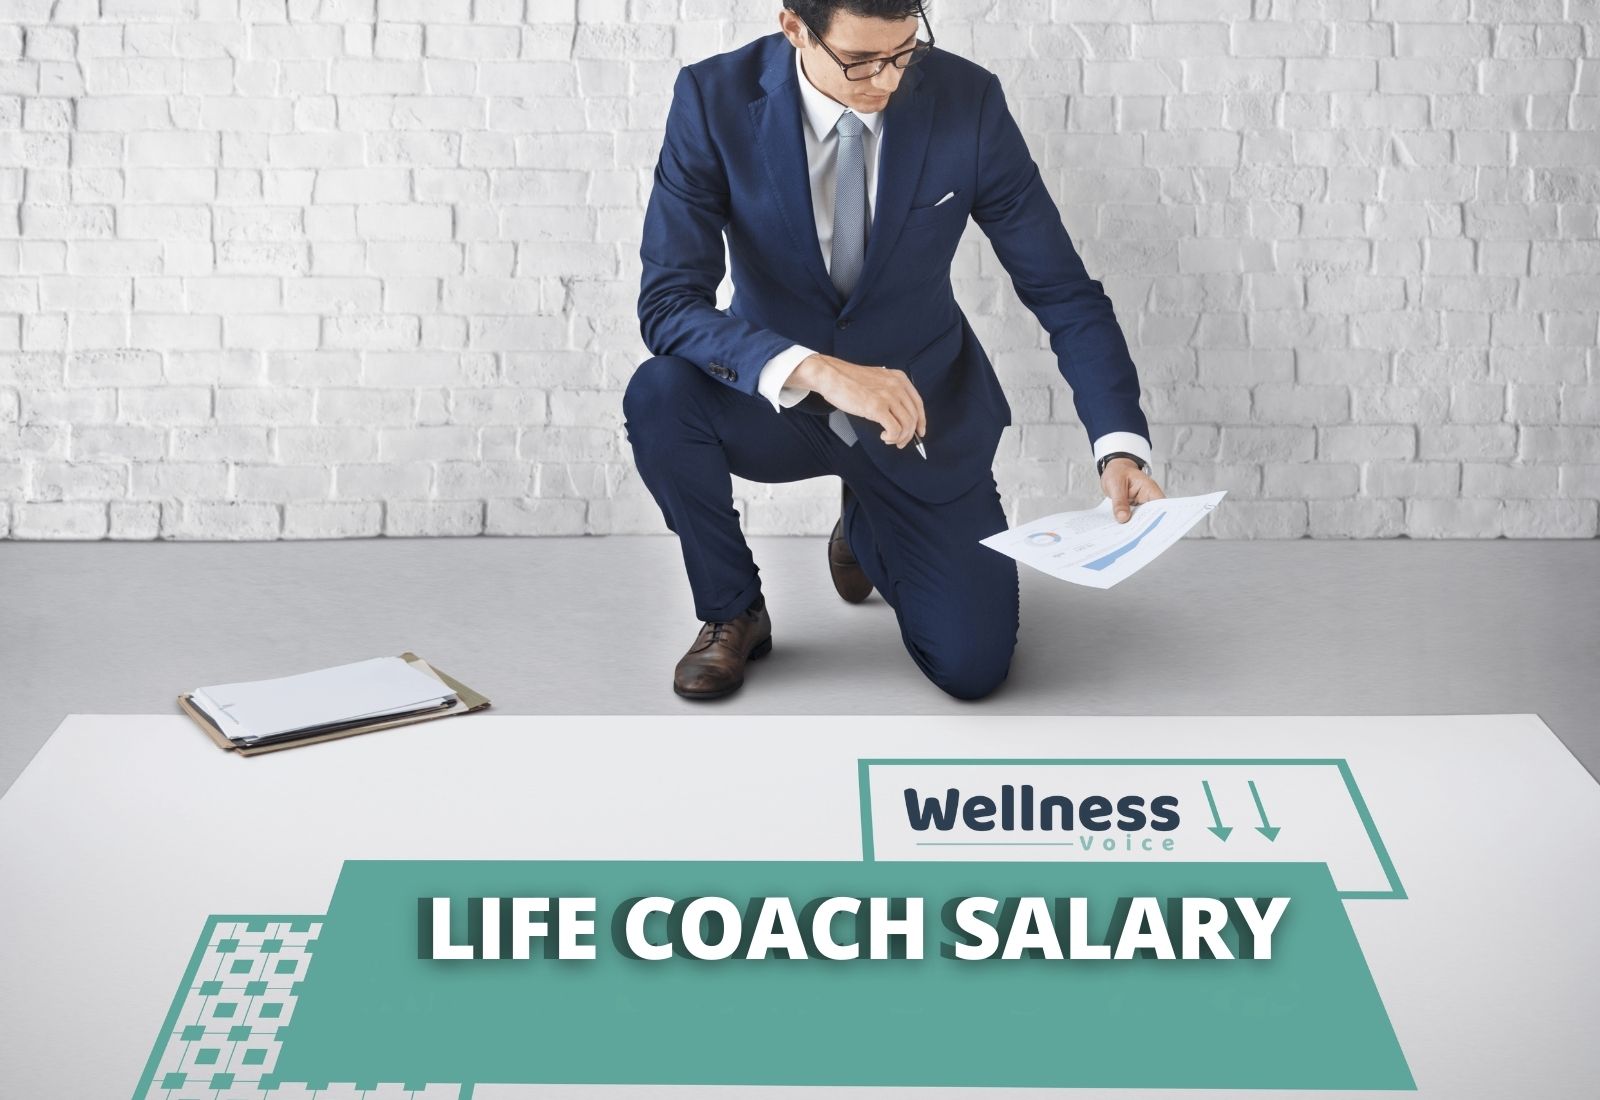 Life Coach Salary: An Ultimate Guide